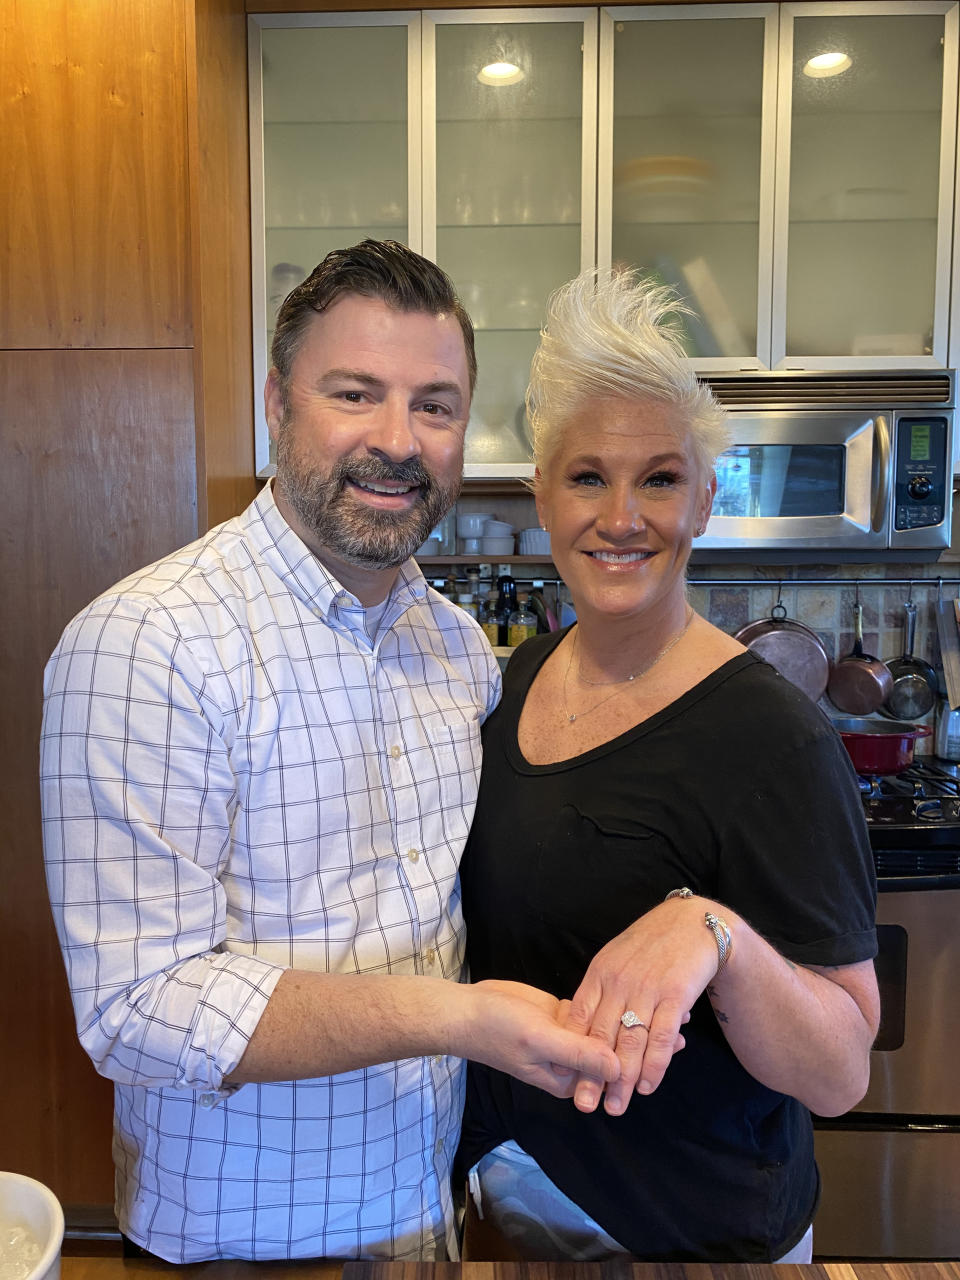 Stuart Claxton, Anne Burrell and that ring!  (Anne Burrell)